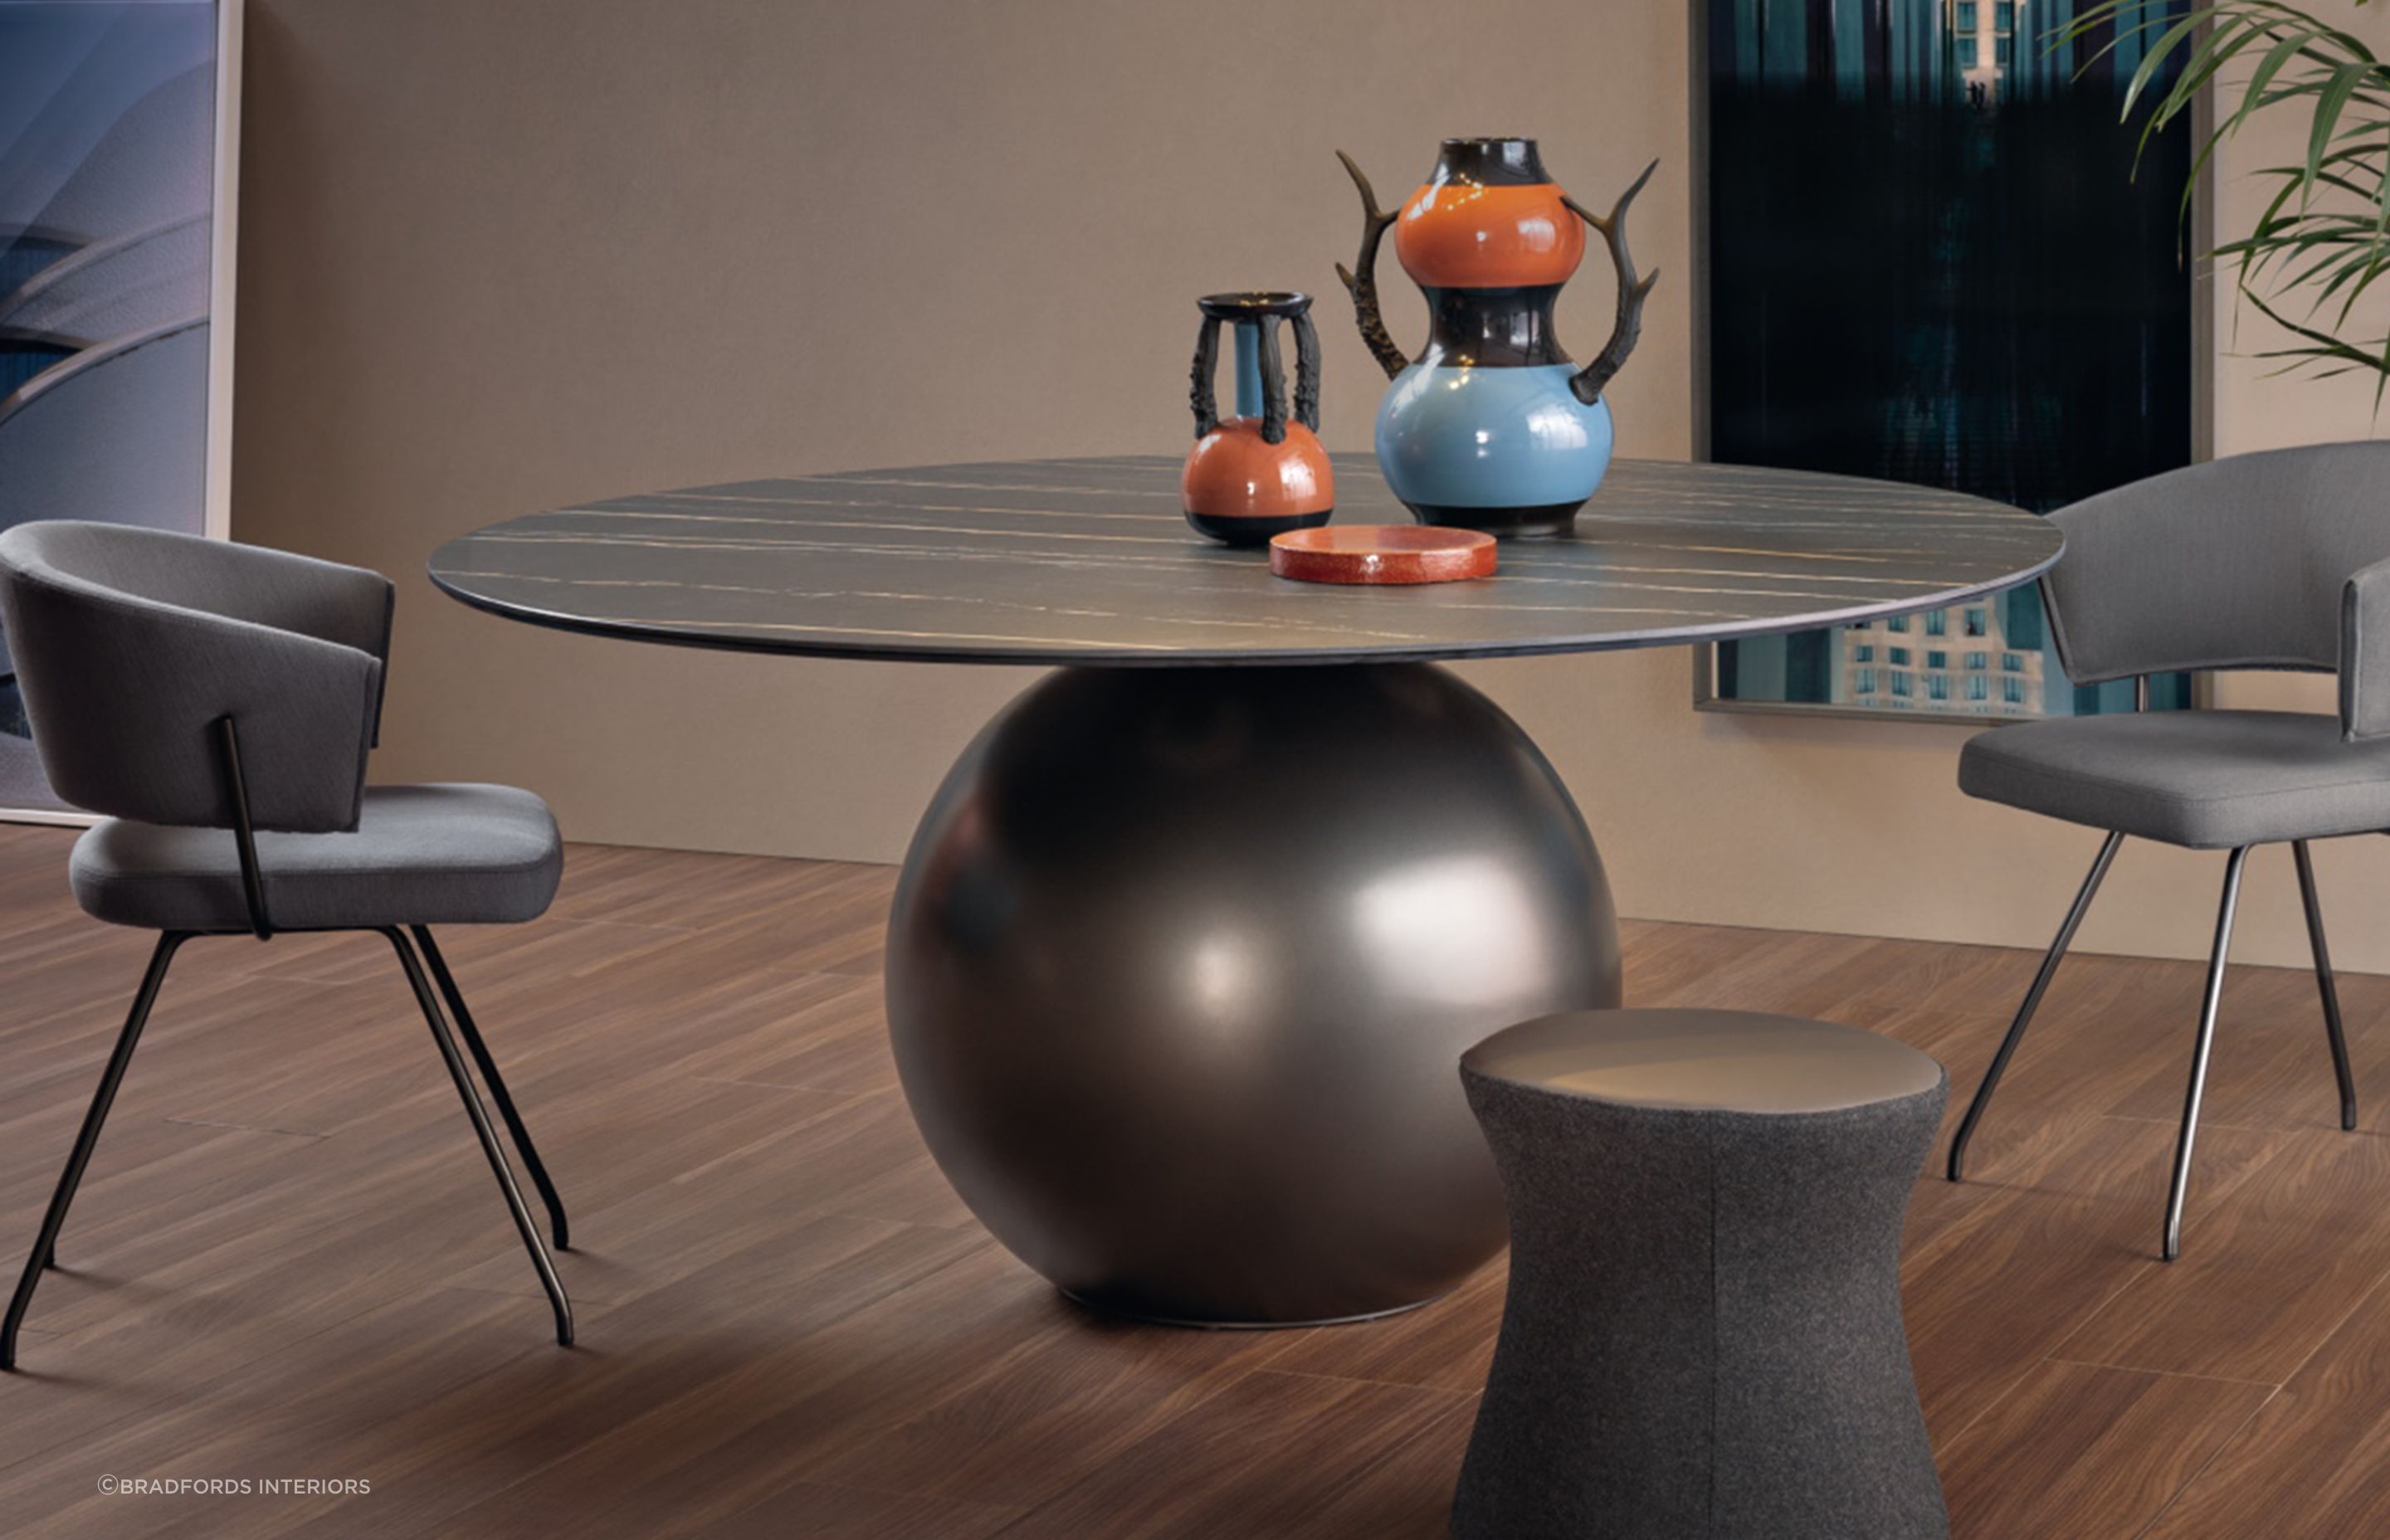 The Circus Dining Table is made in Italy by Bonaldo, which makes the perfect statement piece to any dining space